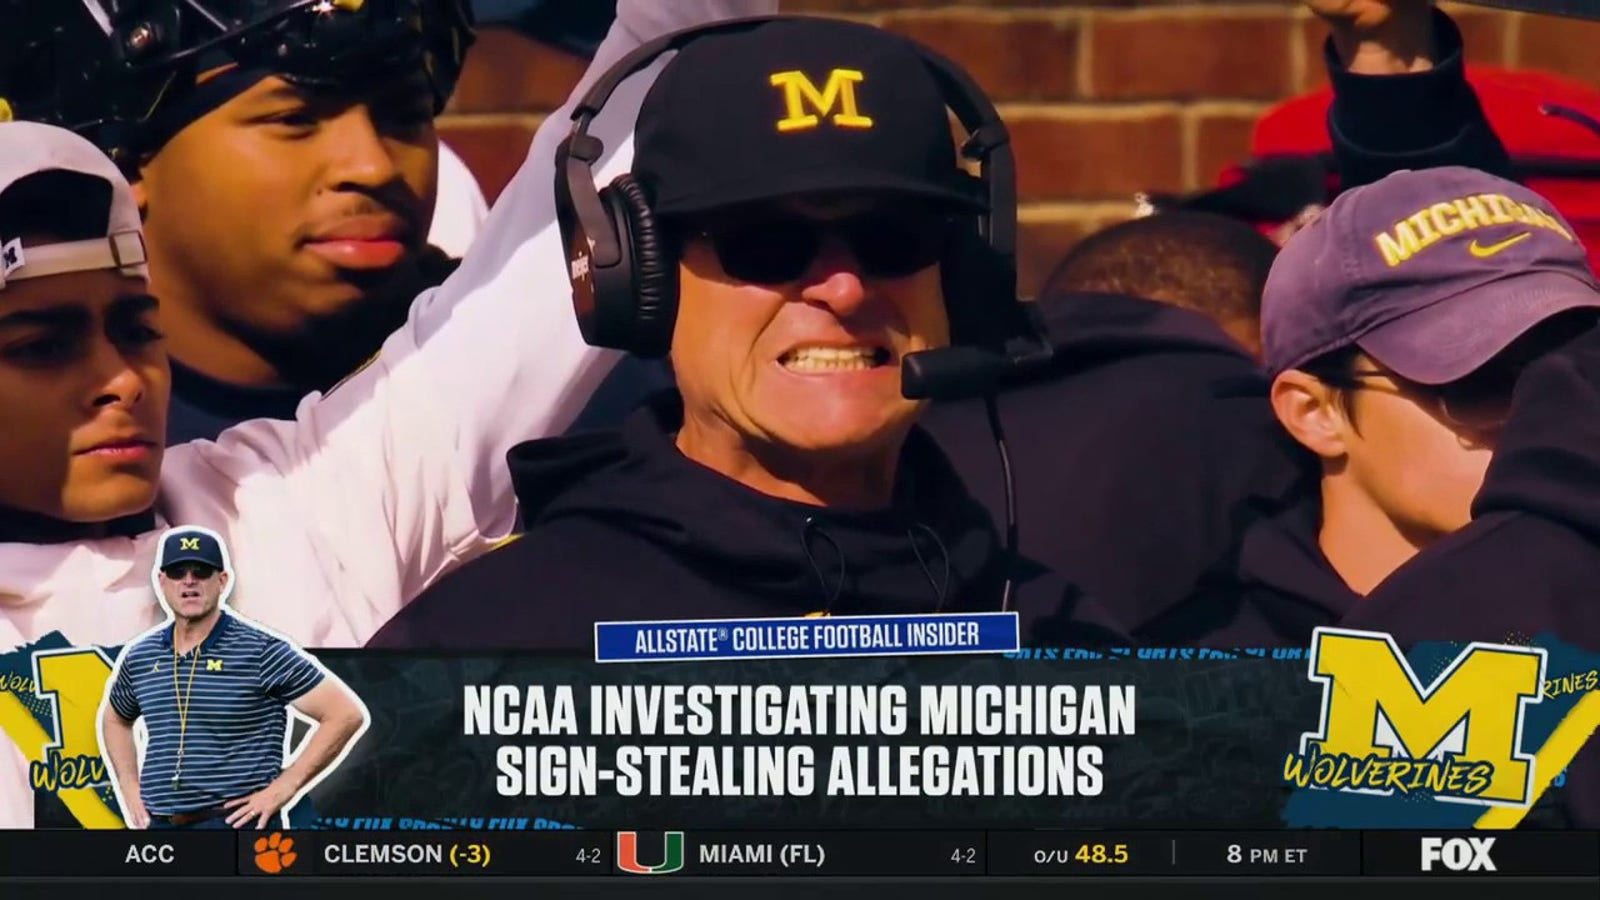 Bruce Feldman gives an update on Jim Harbaugh and the sign-stealing allegations at Michigan